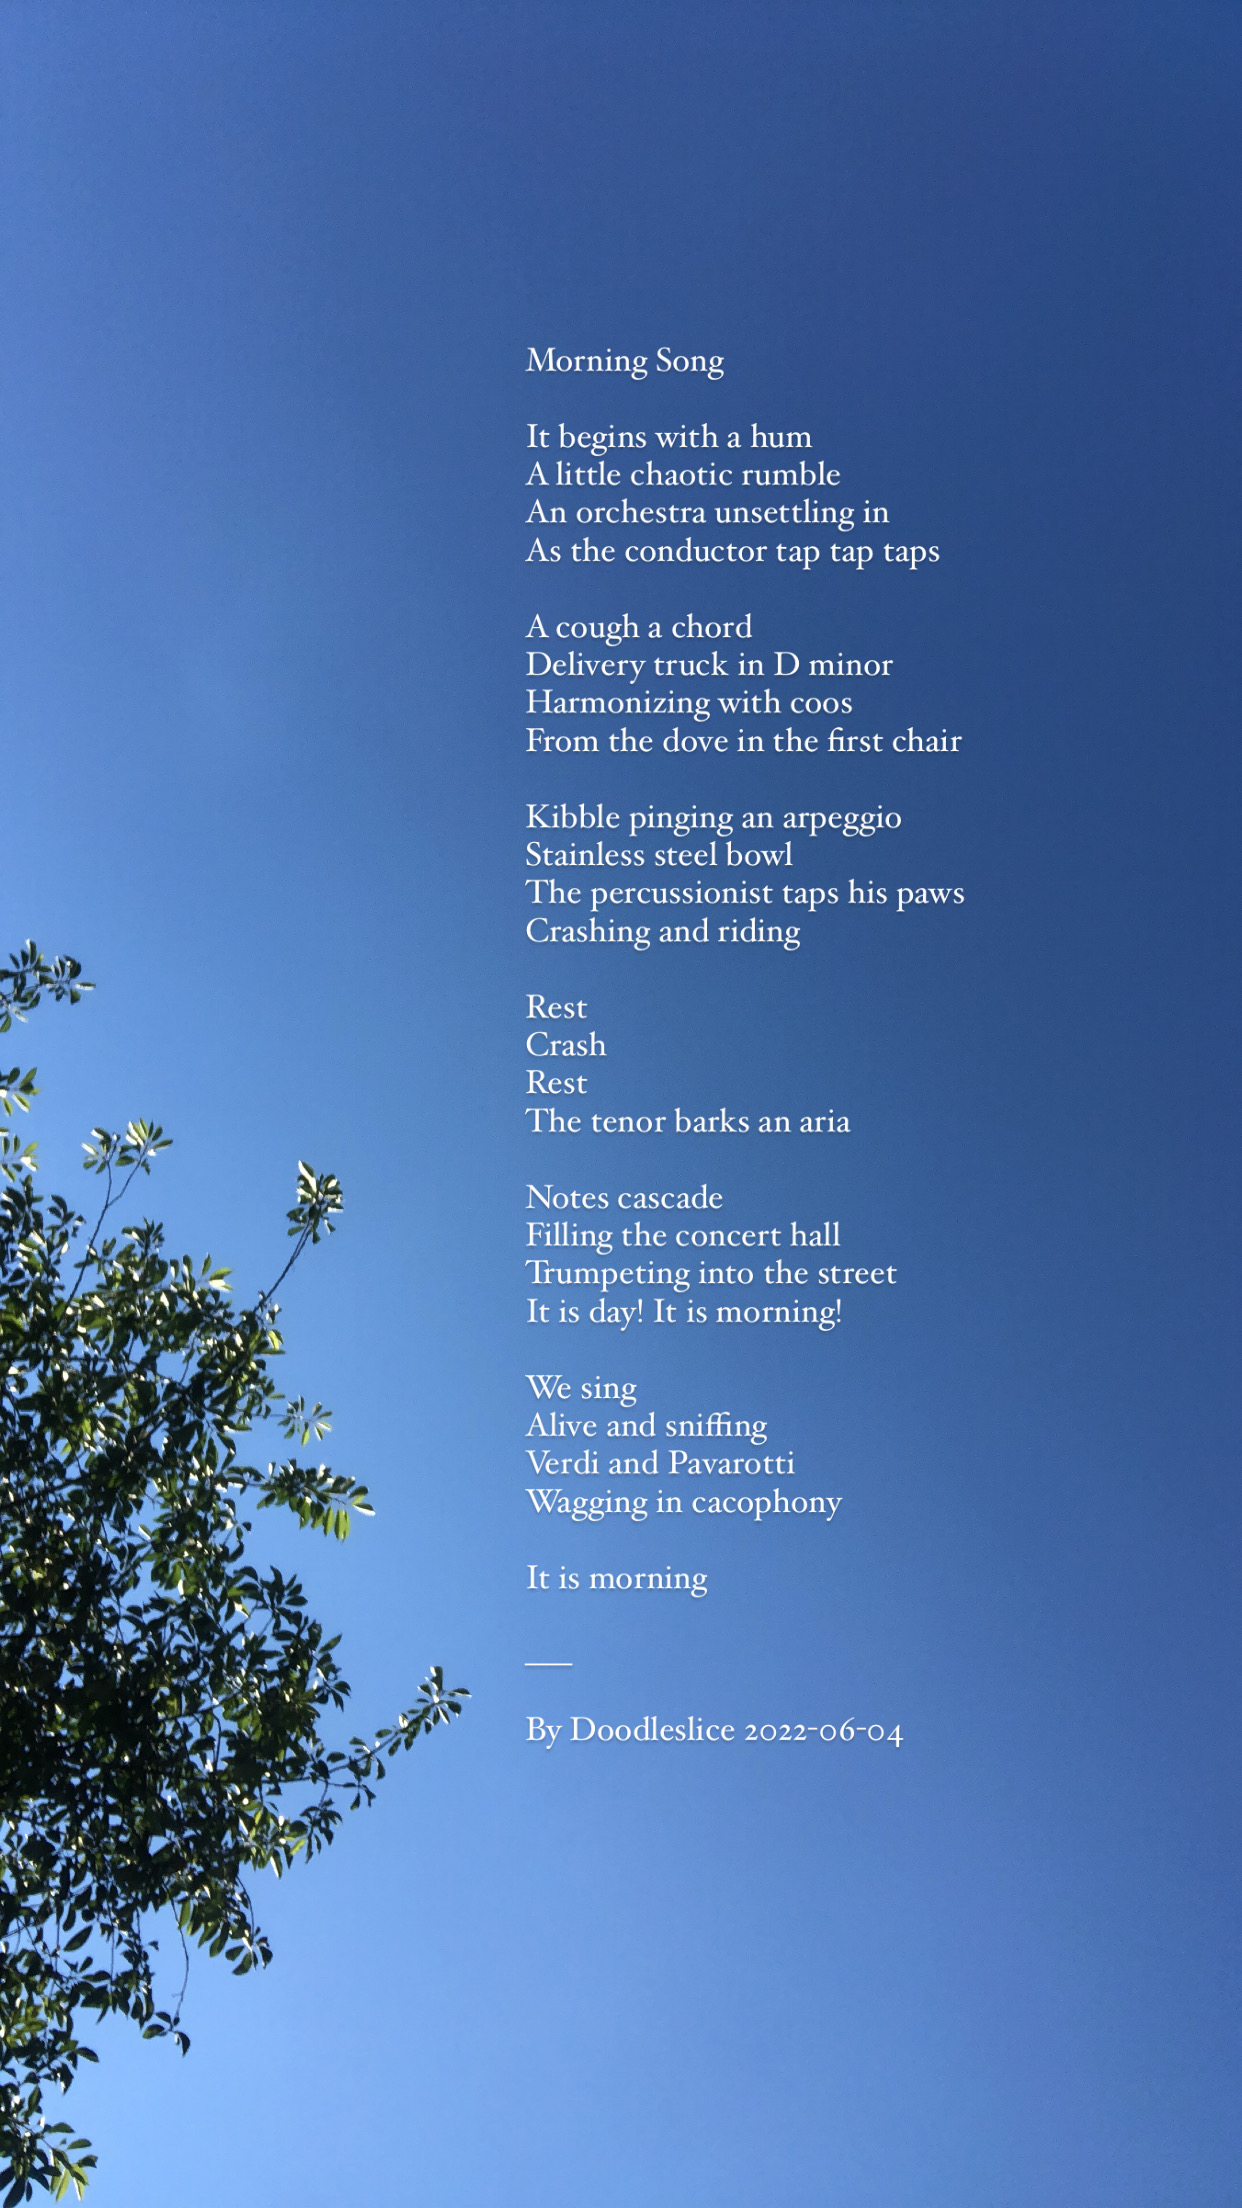 Morning Song - Poem by Doodleslice